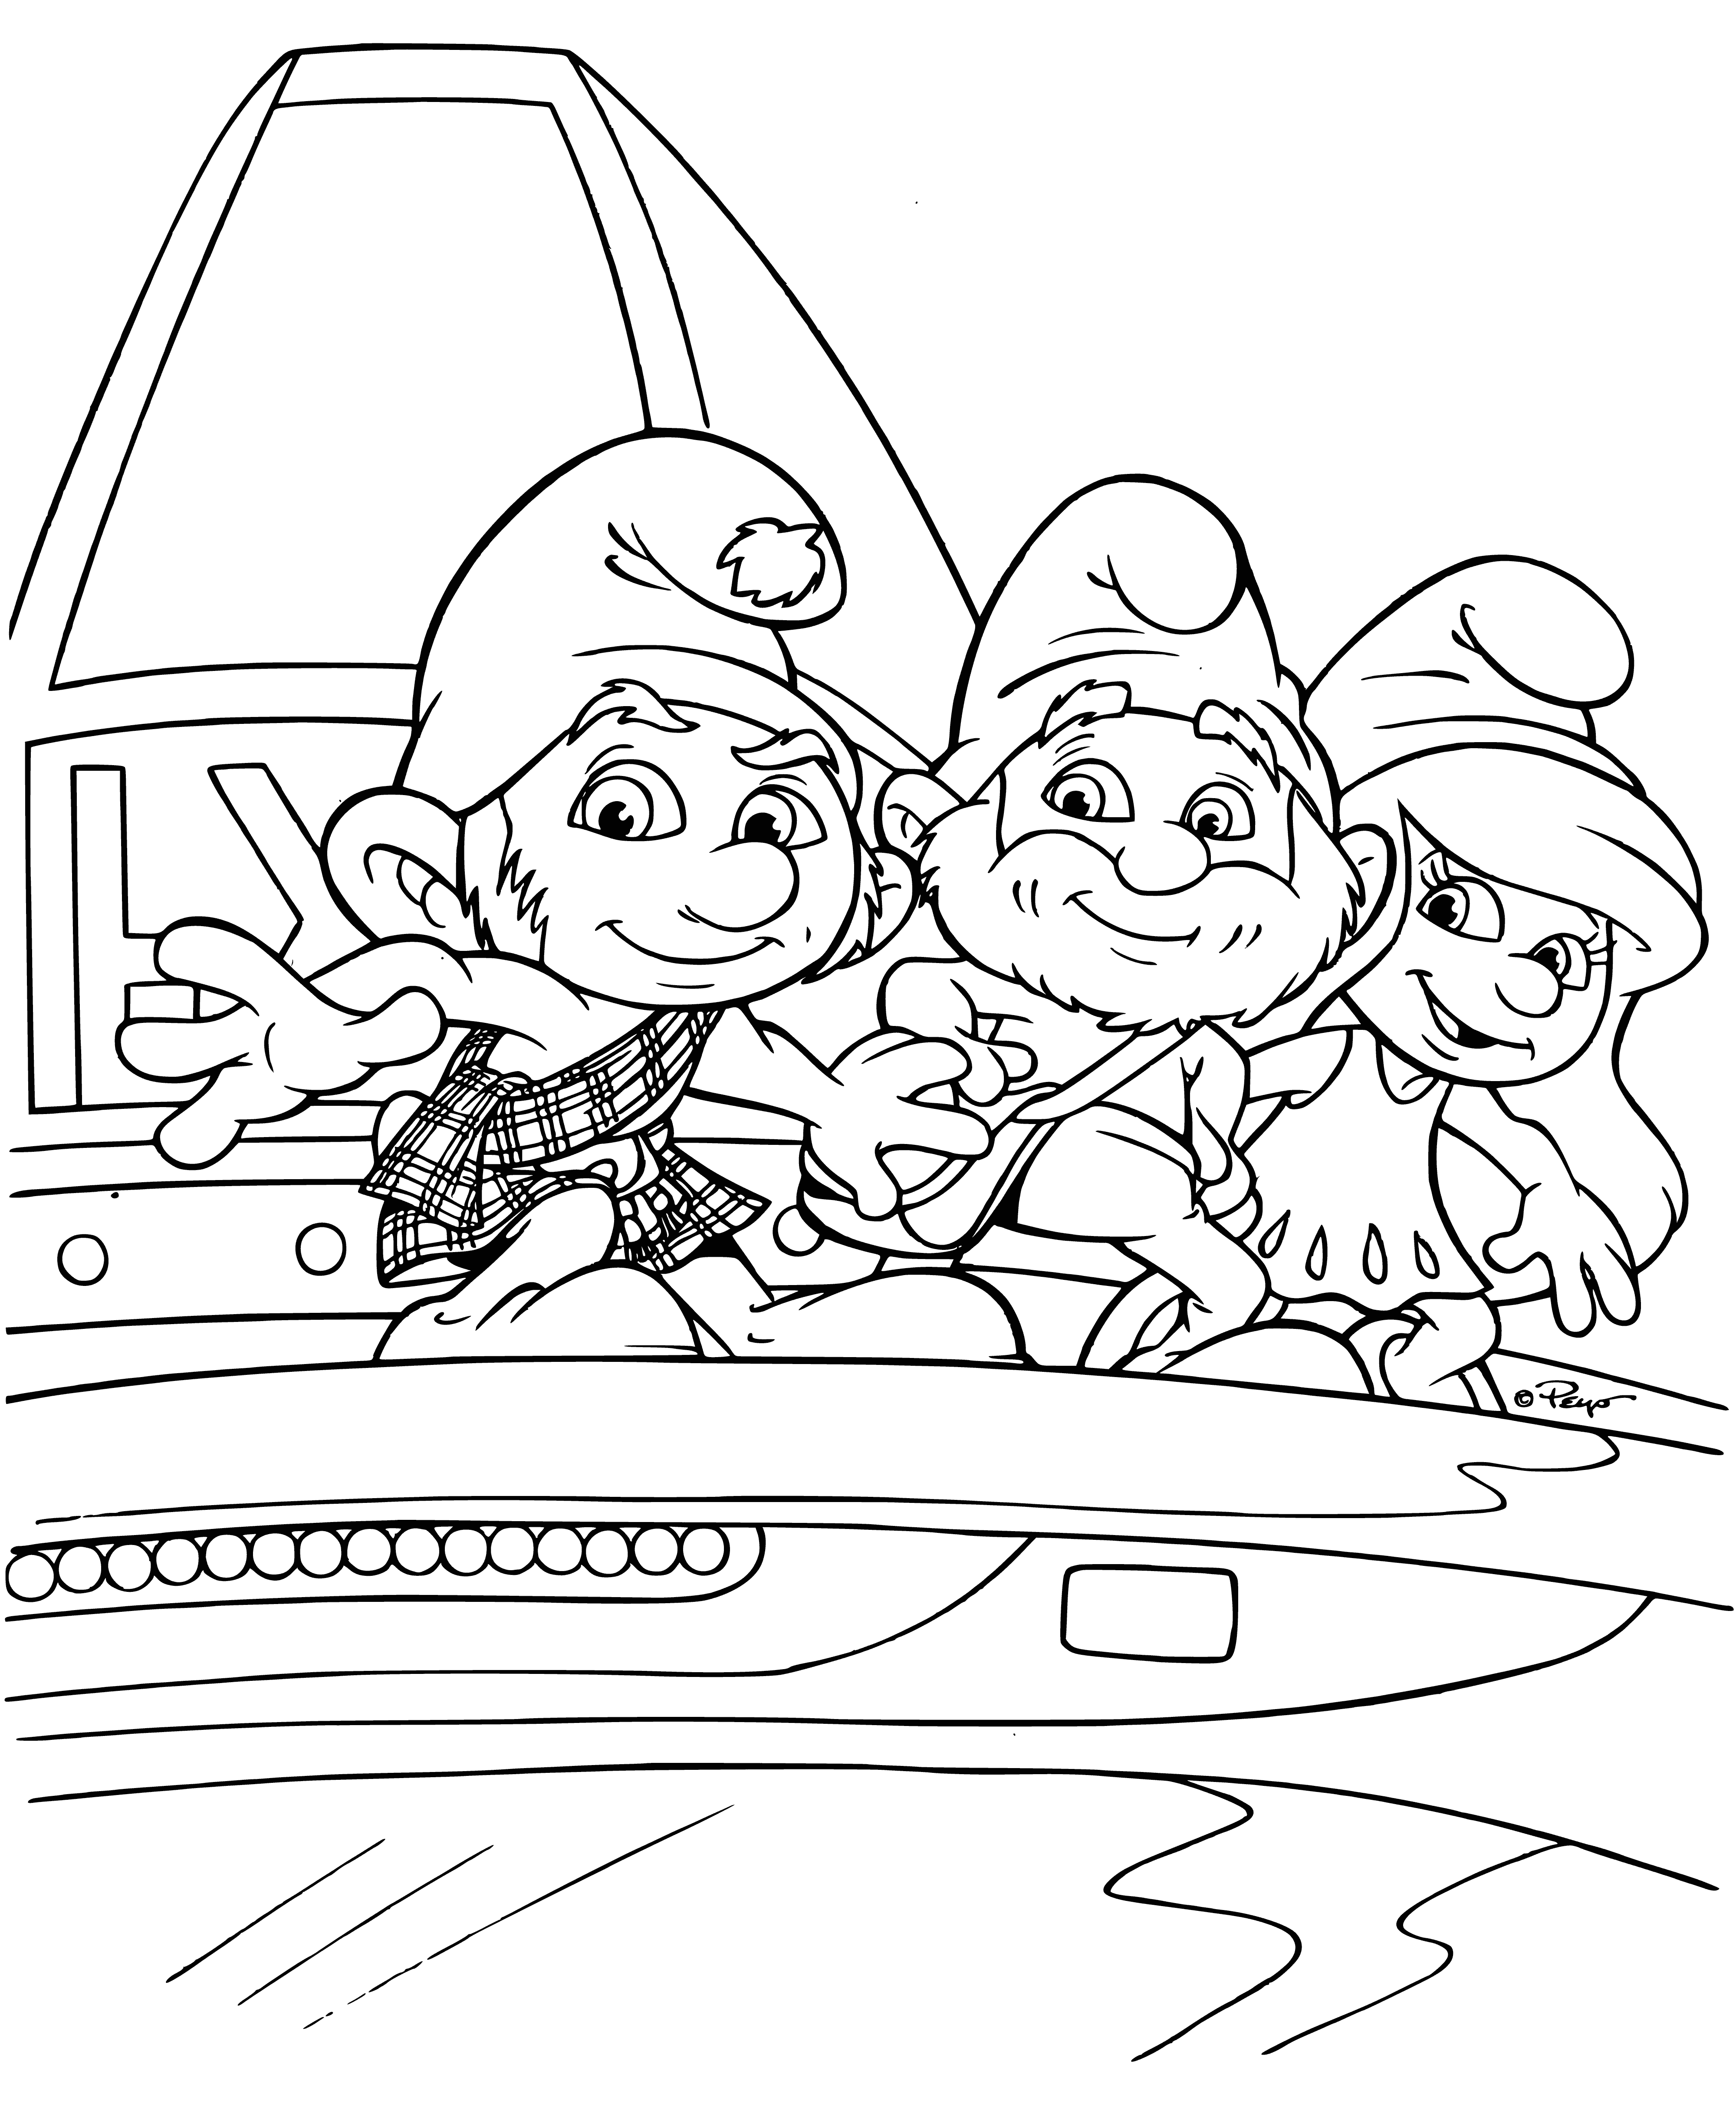 Smurfmobile coloring page